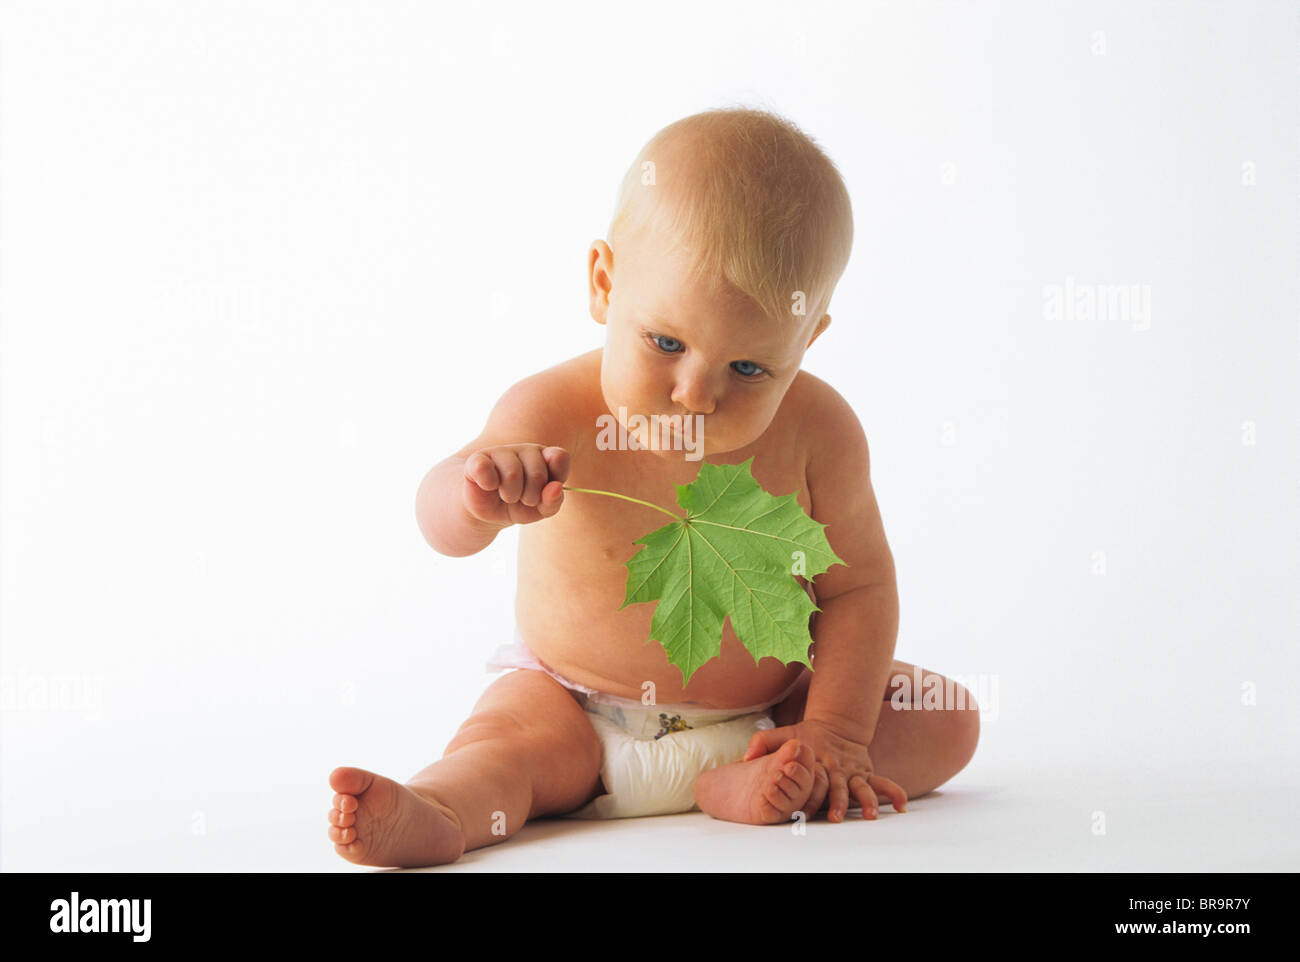 1990s BABY IN DIAPER HOLDING GREEN LEAF Stock Photo - Alamy